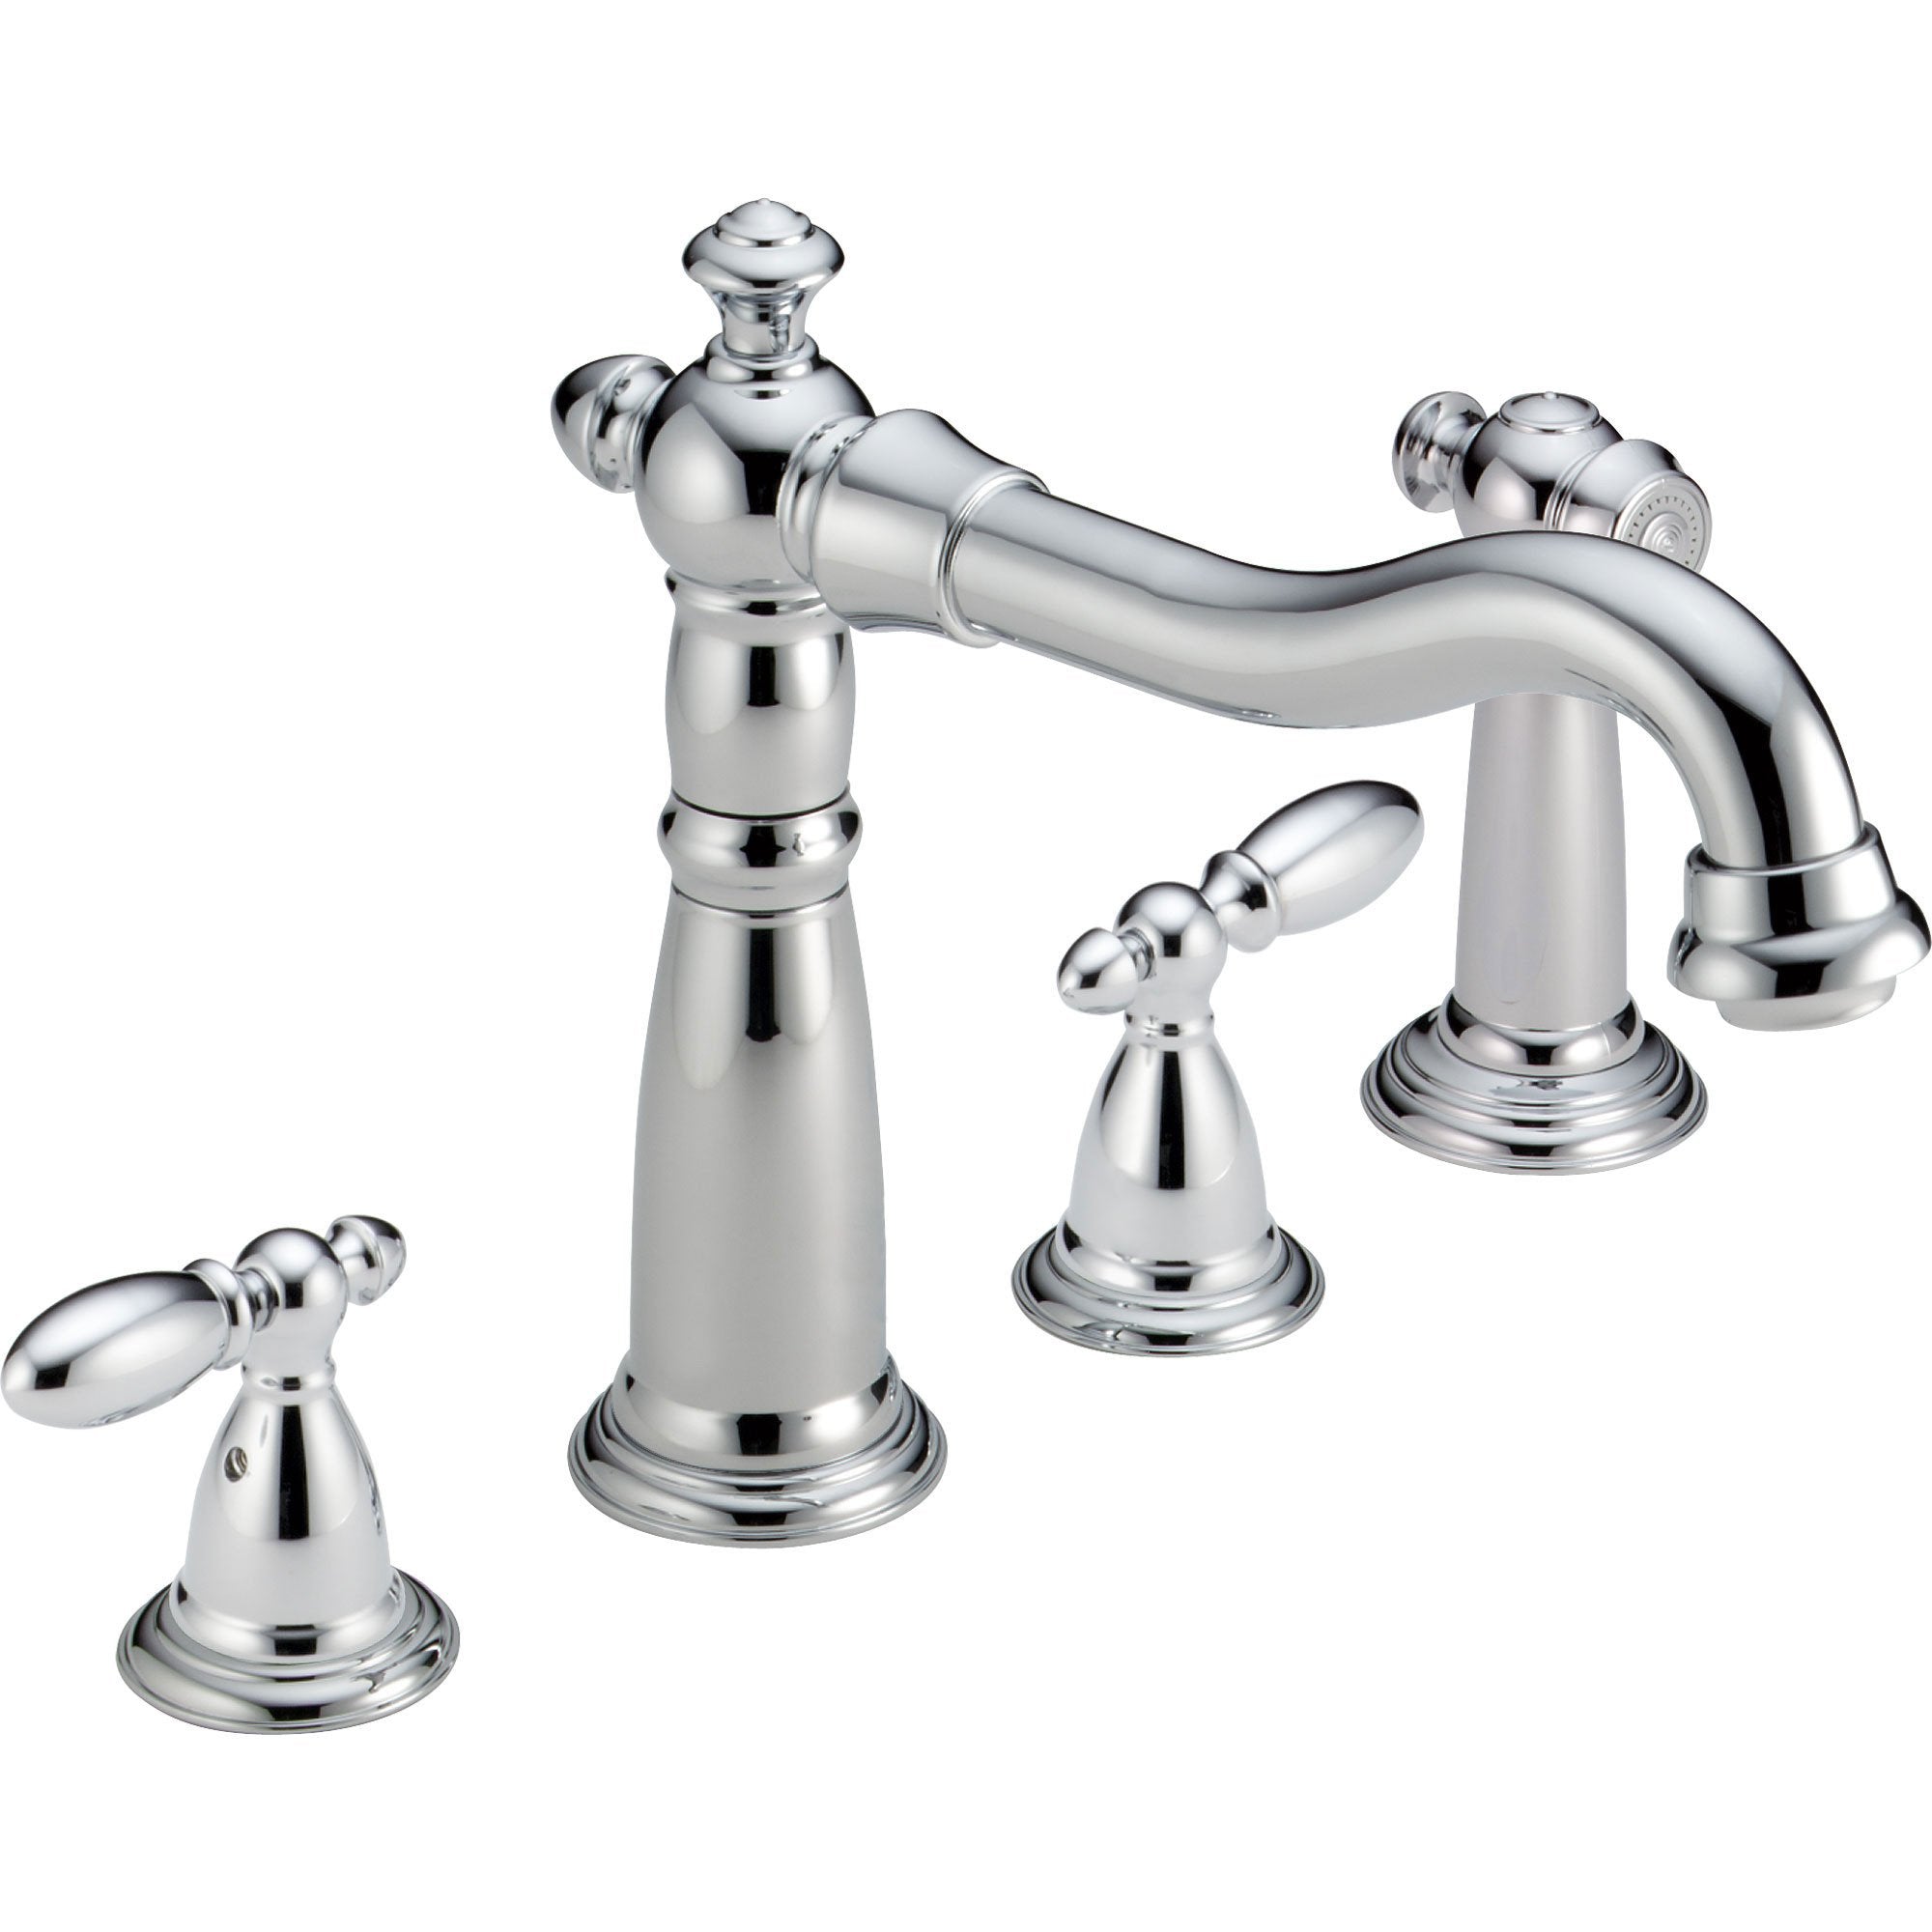 Delta Chrome Two Handle Widespread Kitchen Sink Faucet With Spray 5558 Faucetlistcom